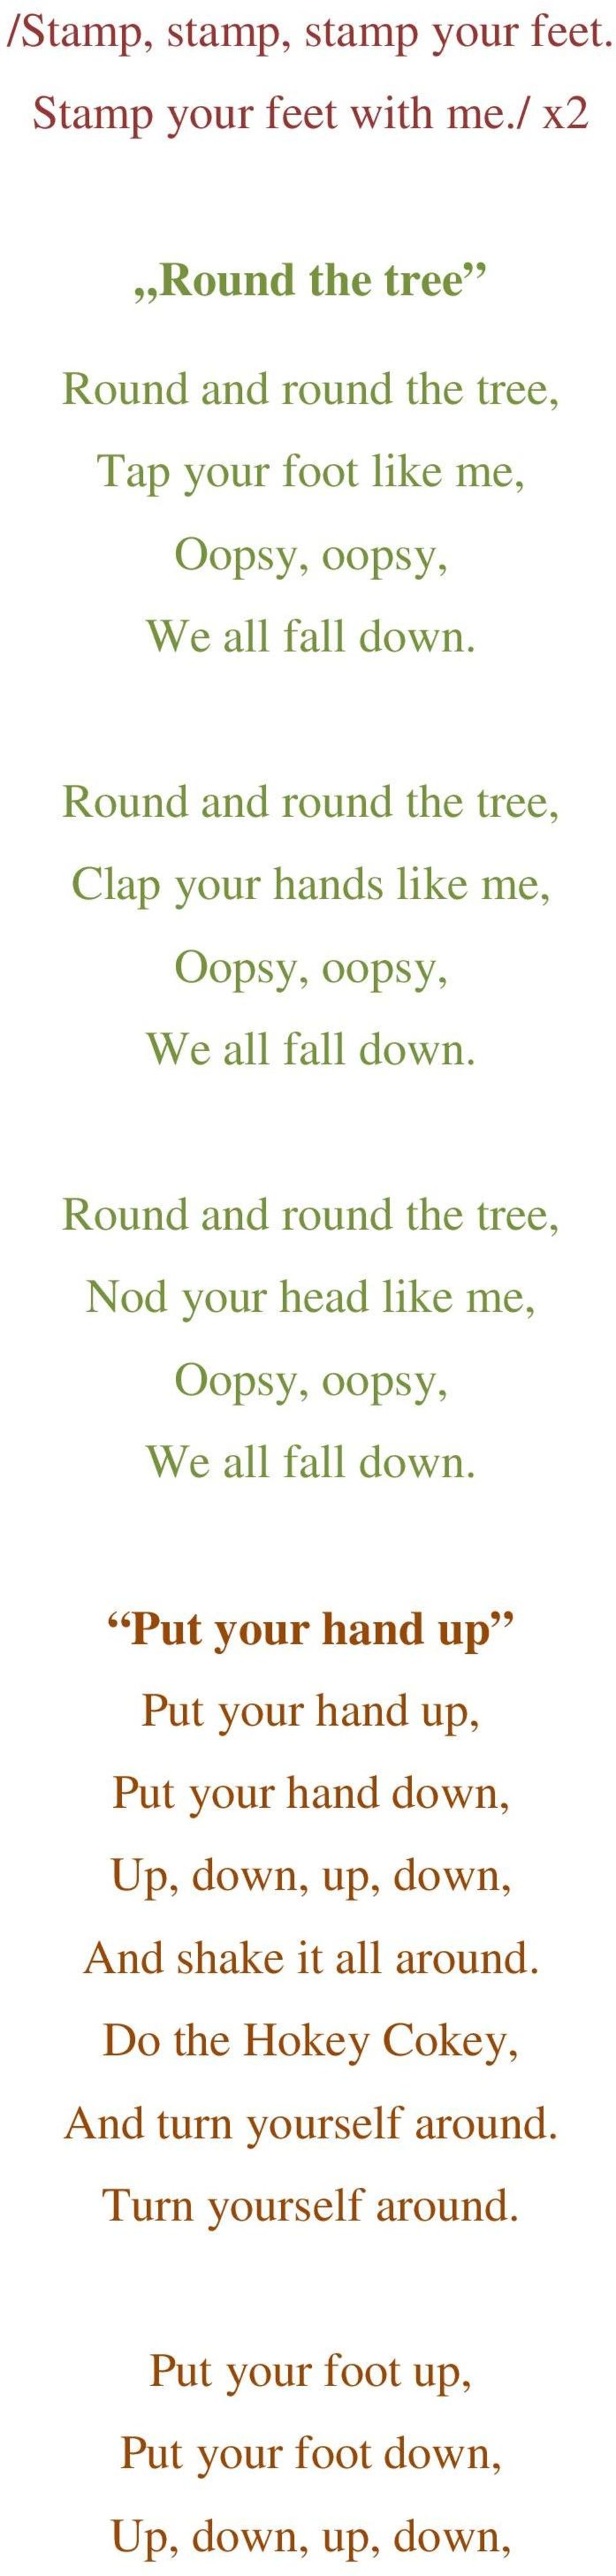 Round and round the tree, Clap your hands like me, Oopsy, oopsy, We all fall down.